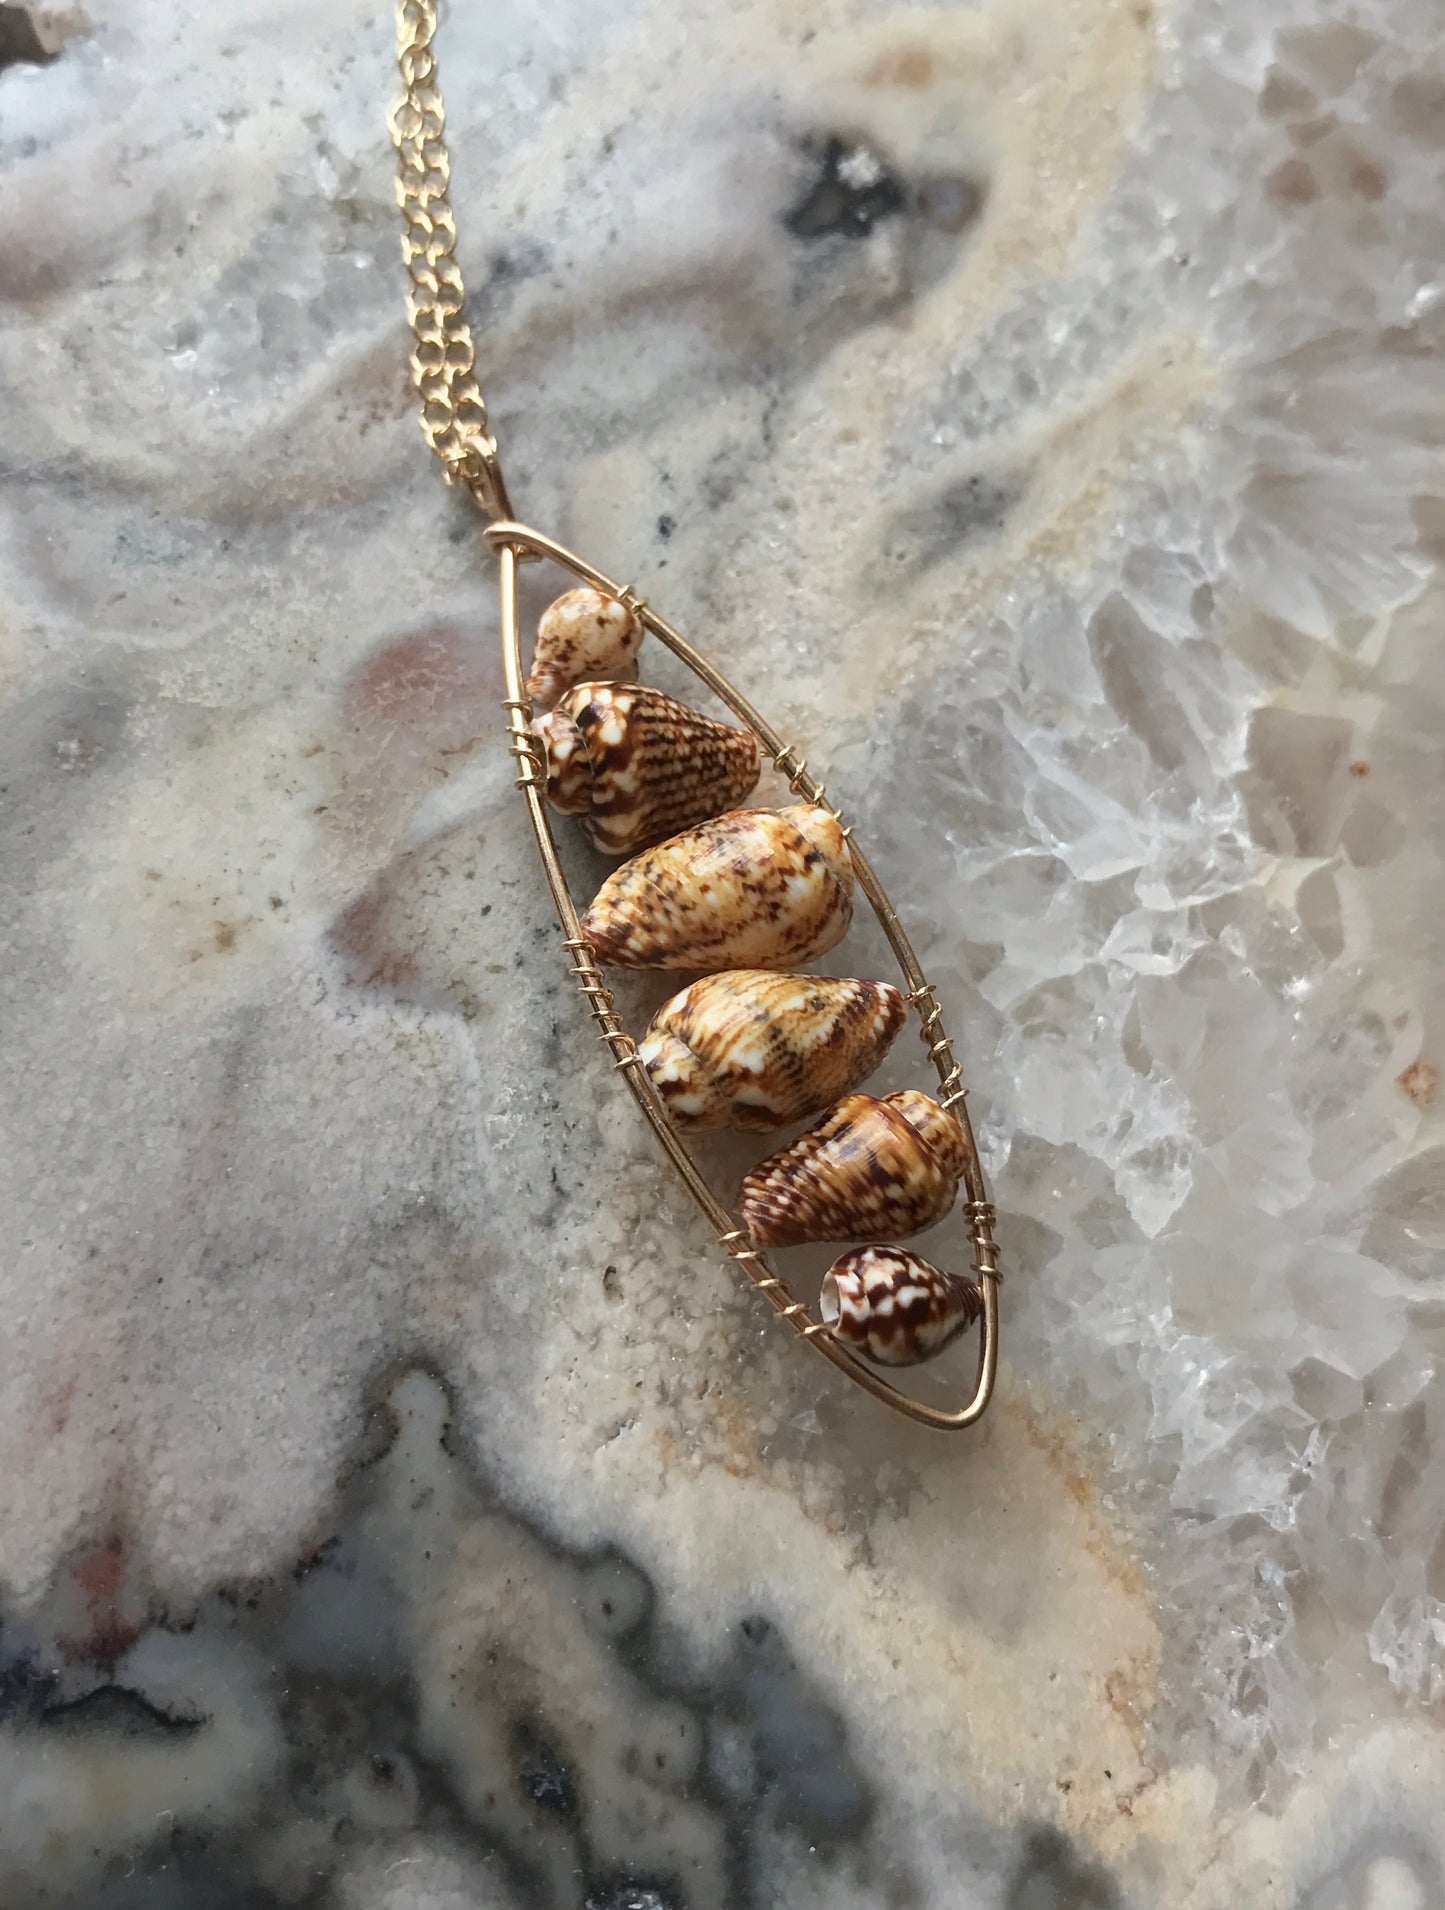 Oval Shell Necklace